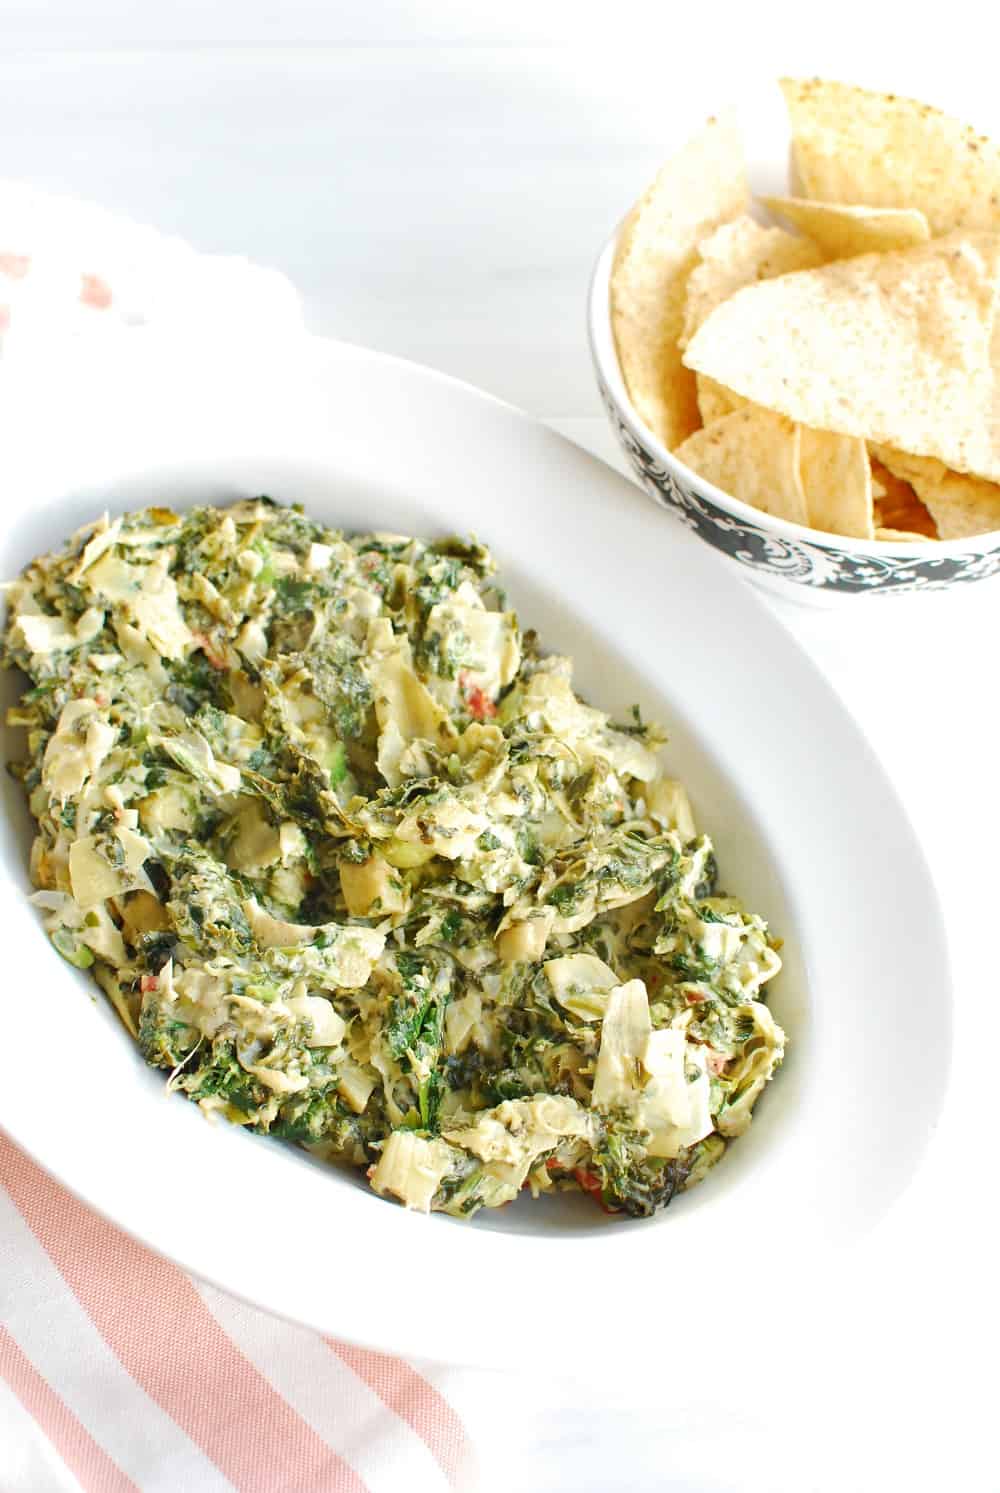 Dairy free spinach artichoke dip in a bowl next to chips